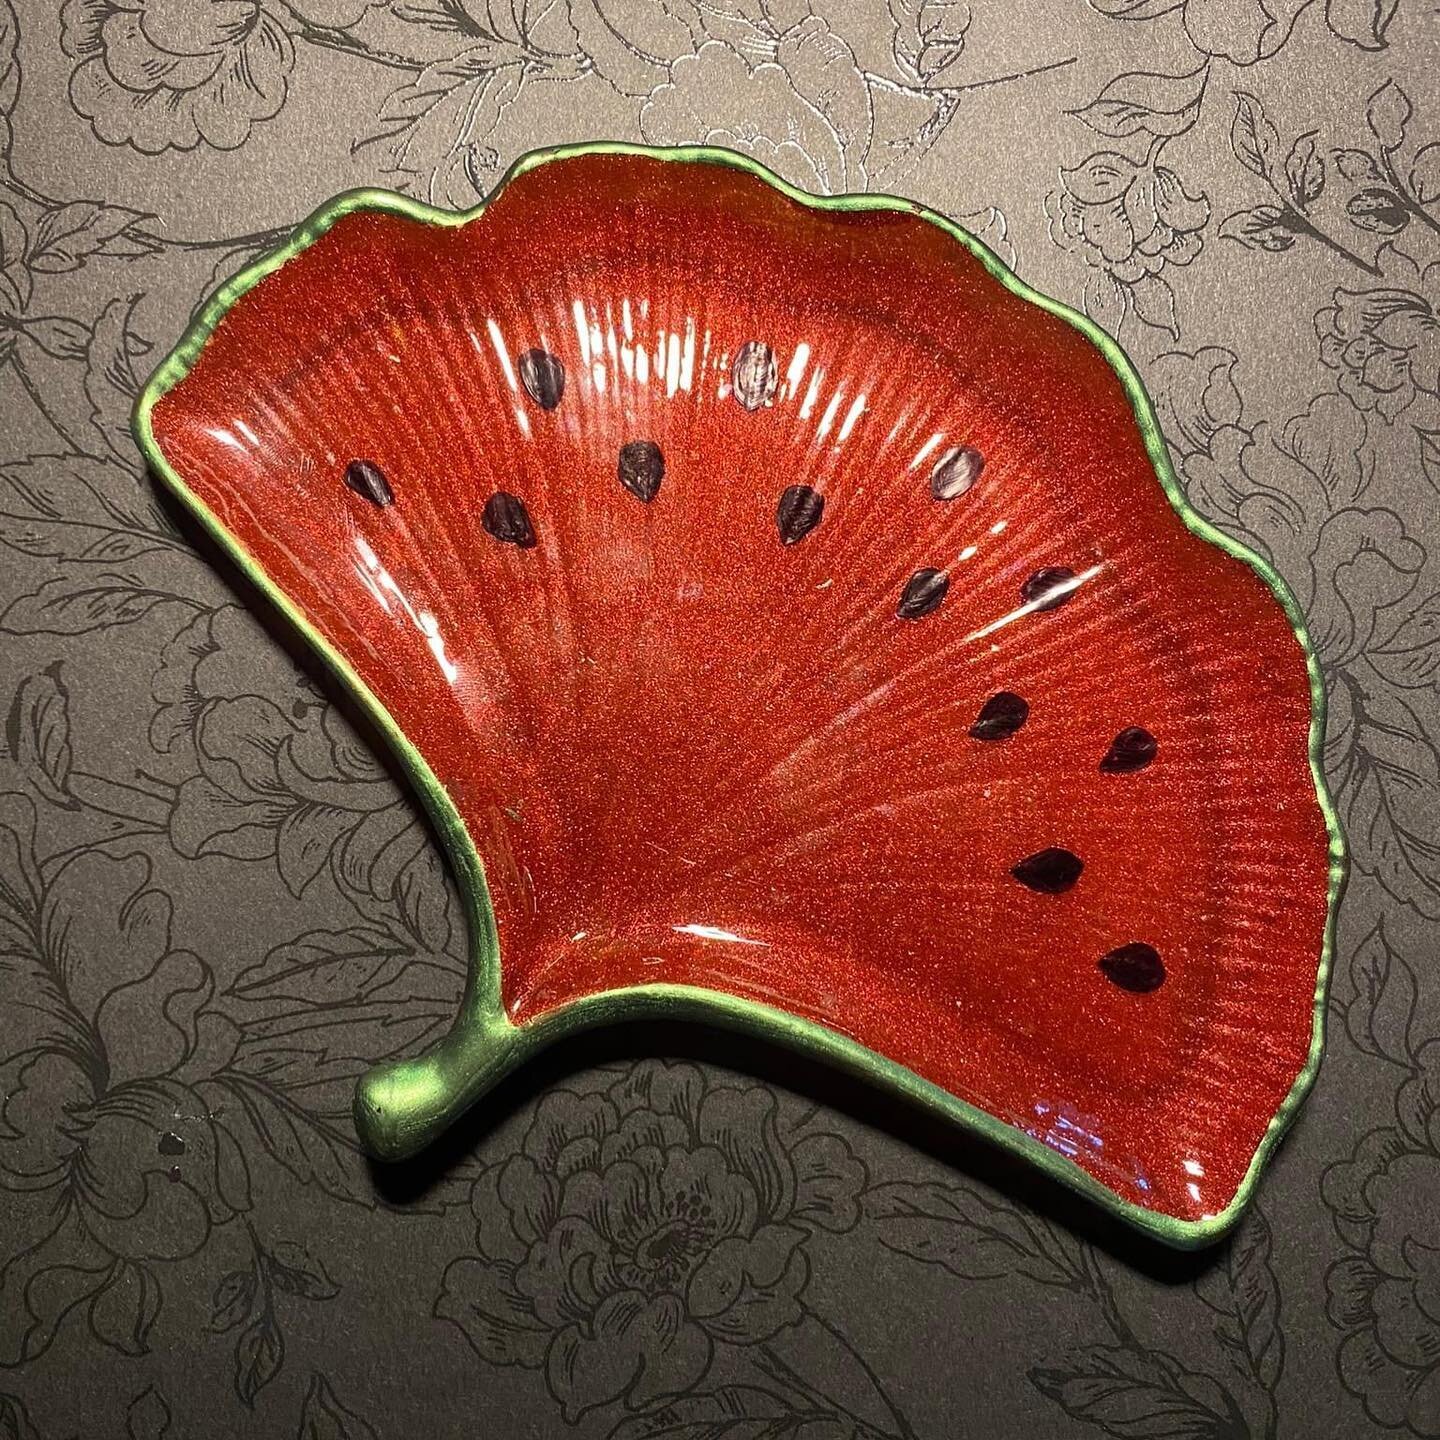  BAT TRANG Golden Rim Leaf Dish for Jewelry Storage Ring Dish  Soap Dish Spoon Rest Trinket Dish Decoration Plant Decoration Gift for Her  Woman Gifts : Clothing, Shoes & Jewelry